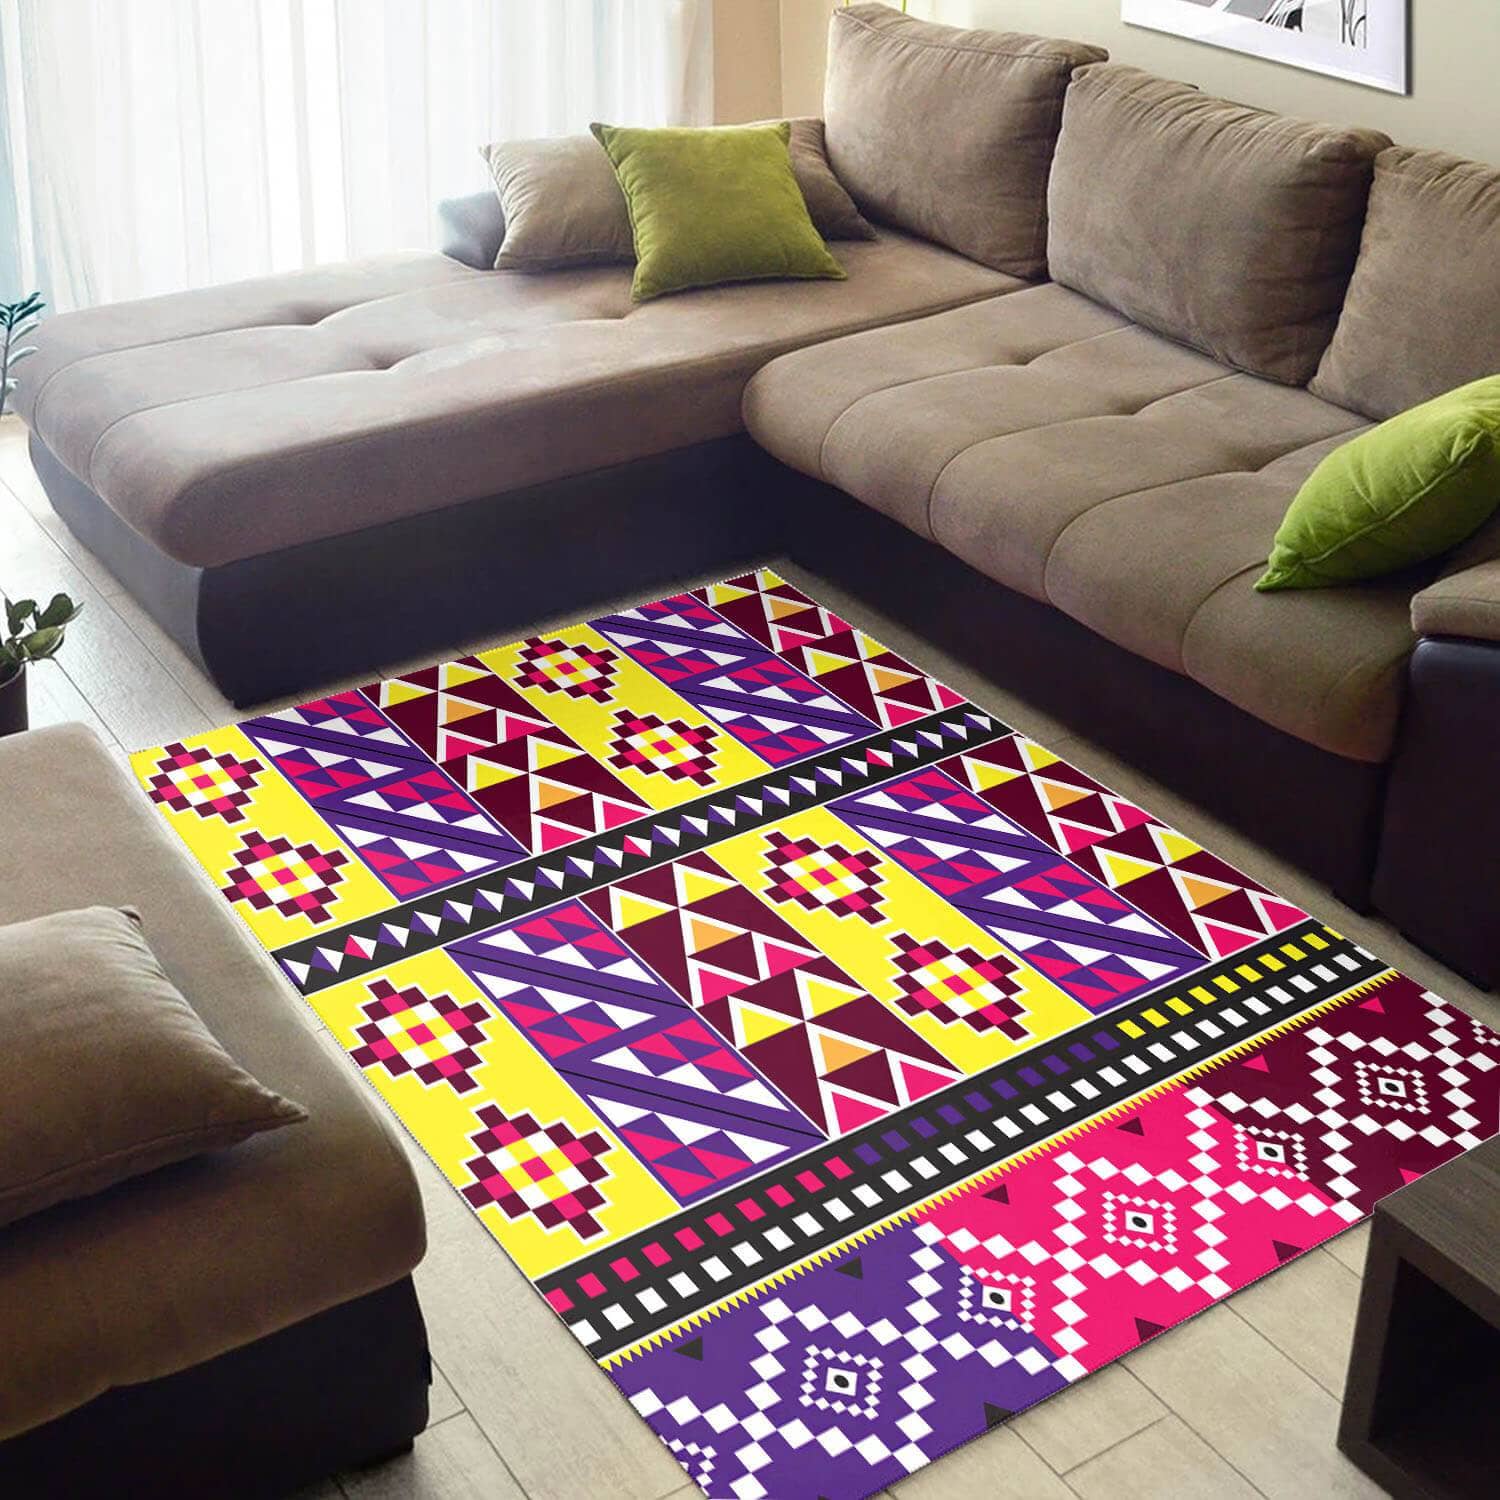 Trendy African American Holiday Afro Afrocentric Pattern Art Design Floor Carpet Inspired Living Room Rug